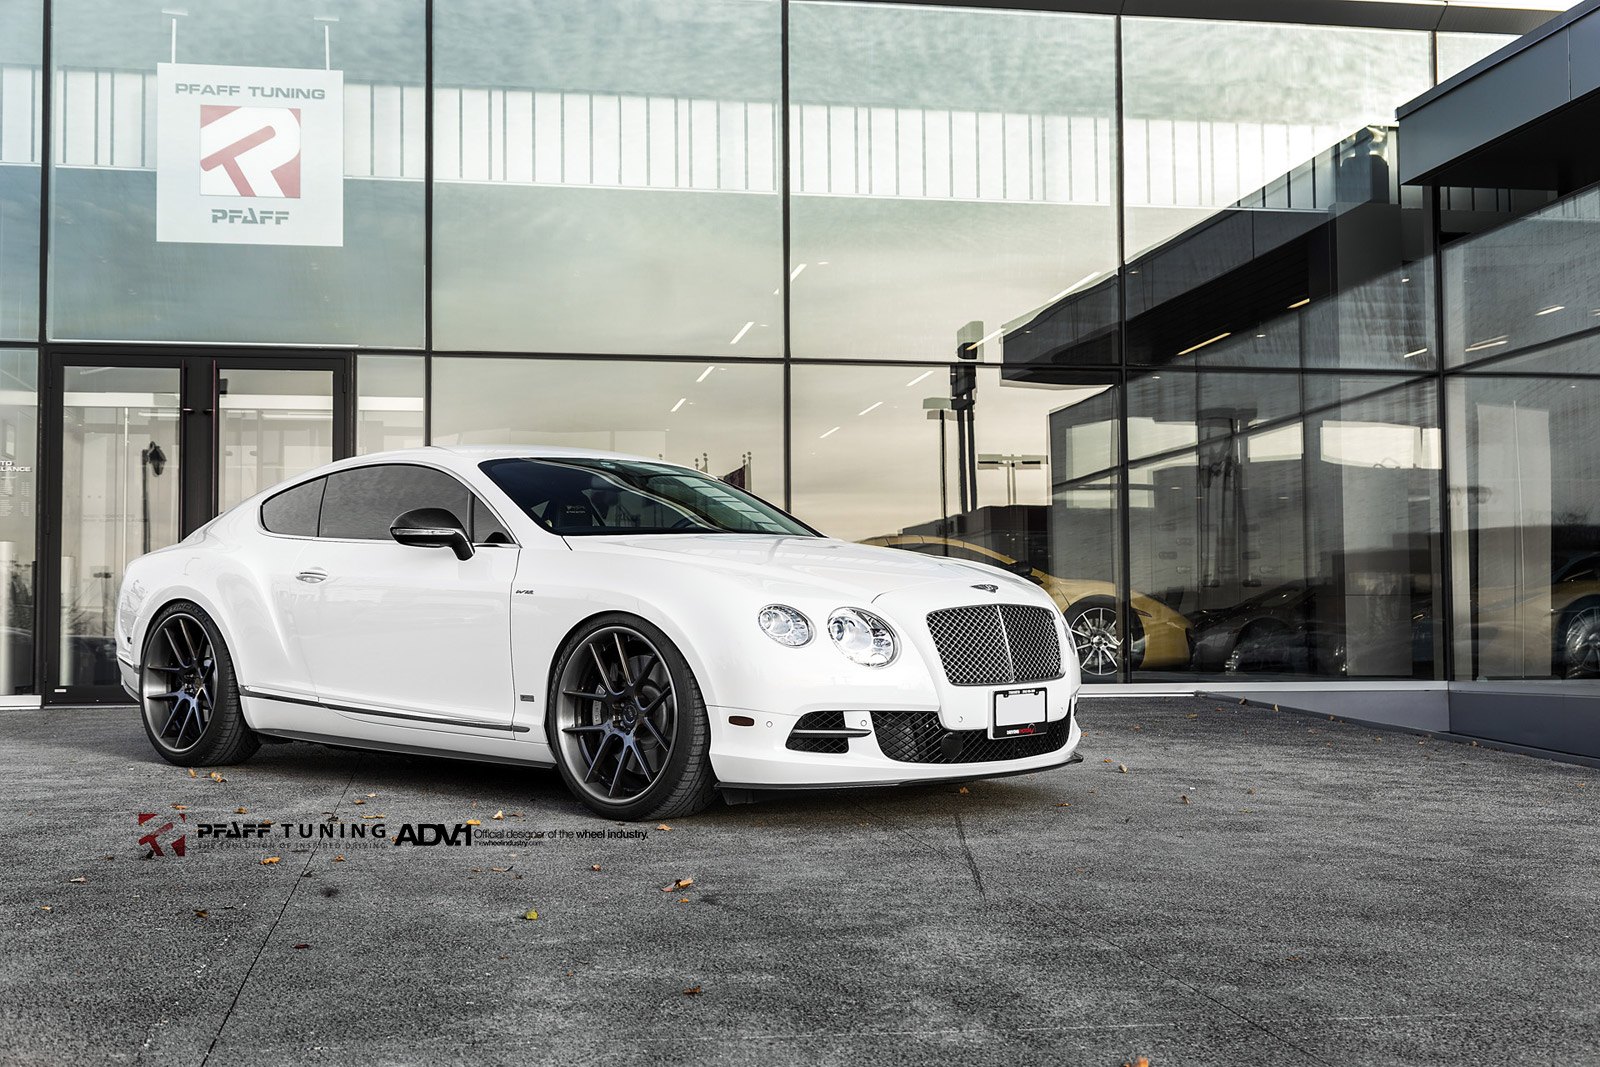 White Bentley Continental with Chrome Grille - Photo by ADV.1